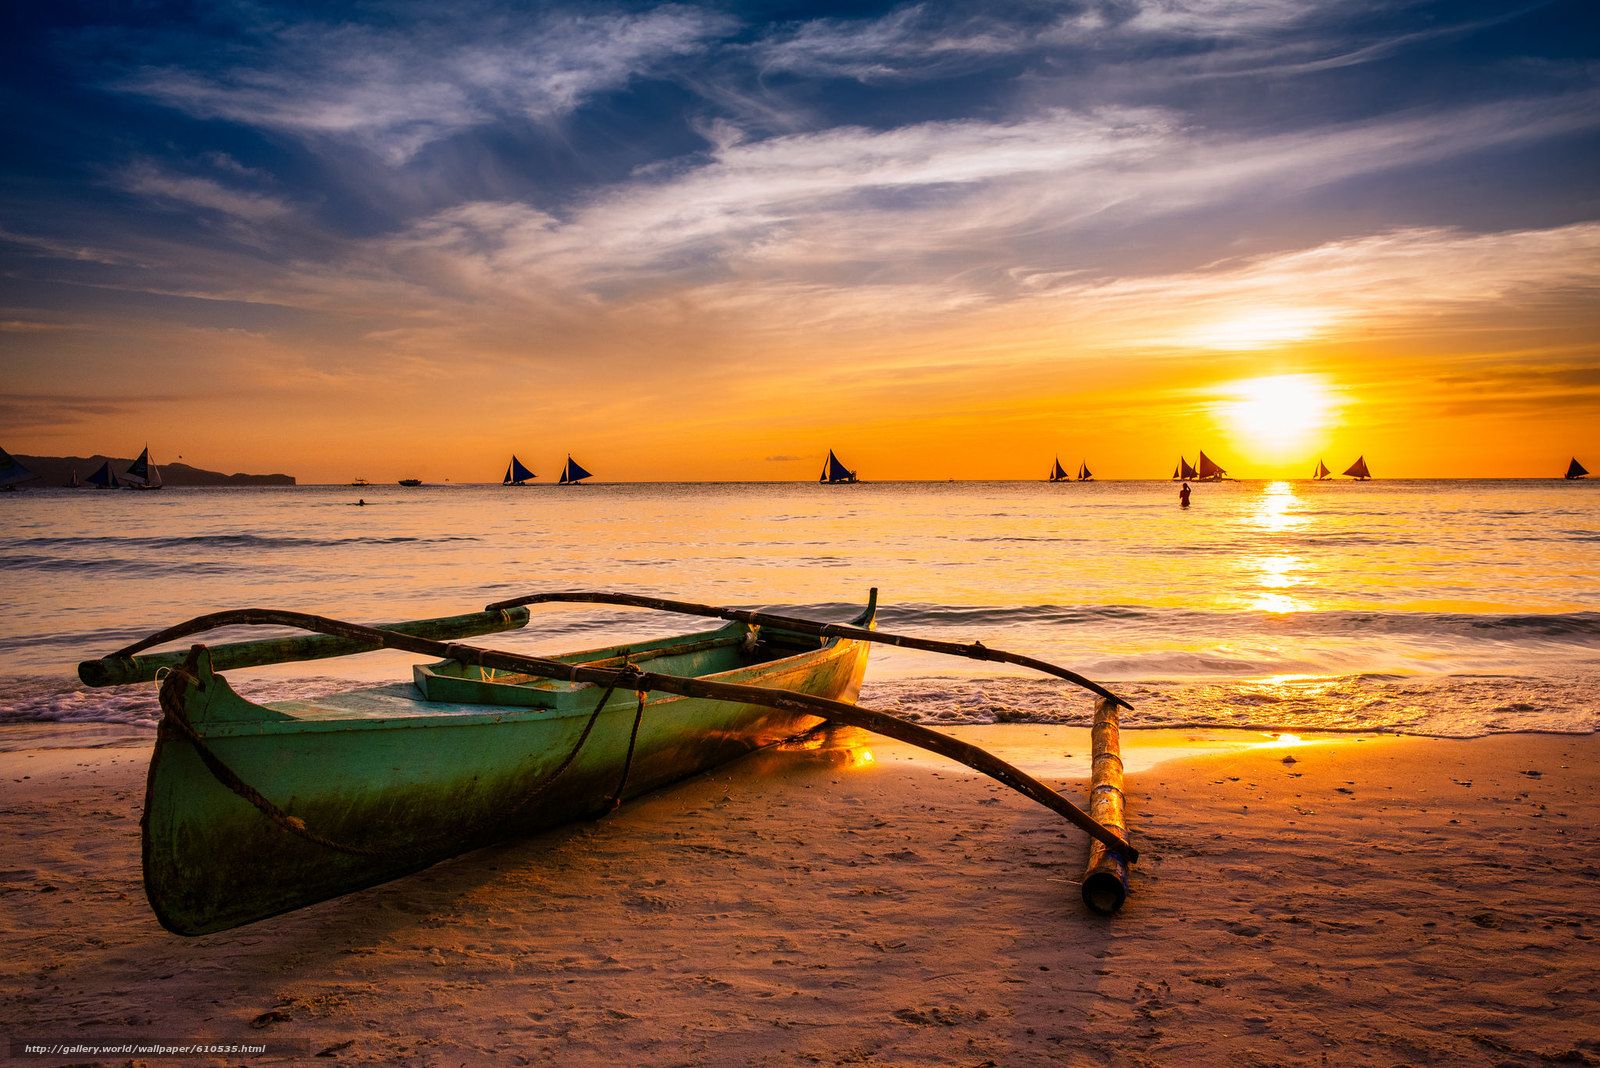 Download wallpaper Boracay, Philippines, paraw, Boracay free desktop wallpaper in the resolution 2048x1367